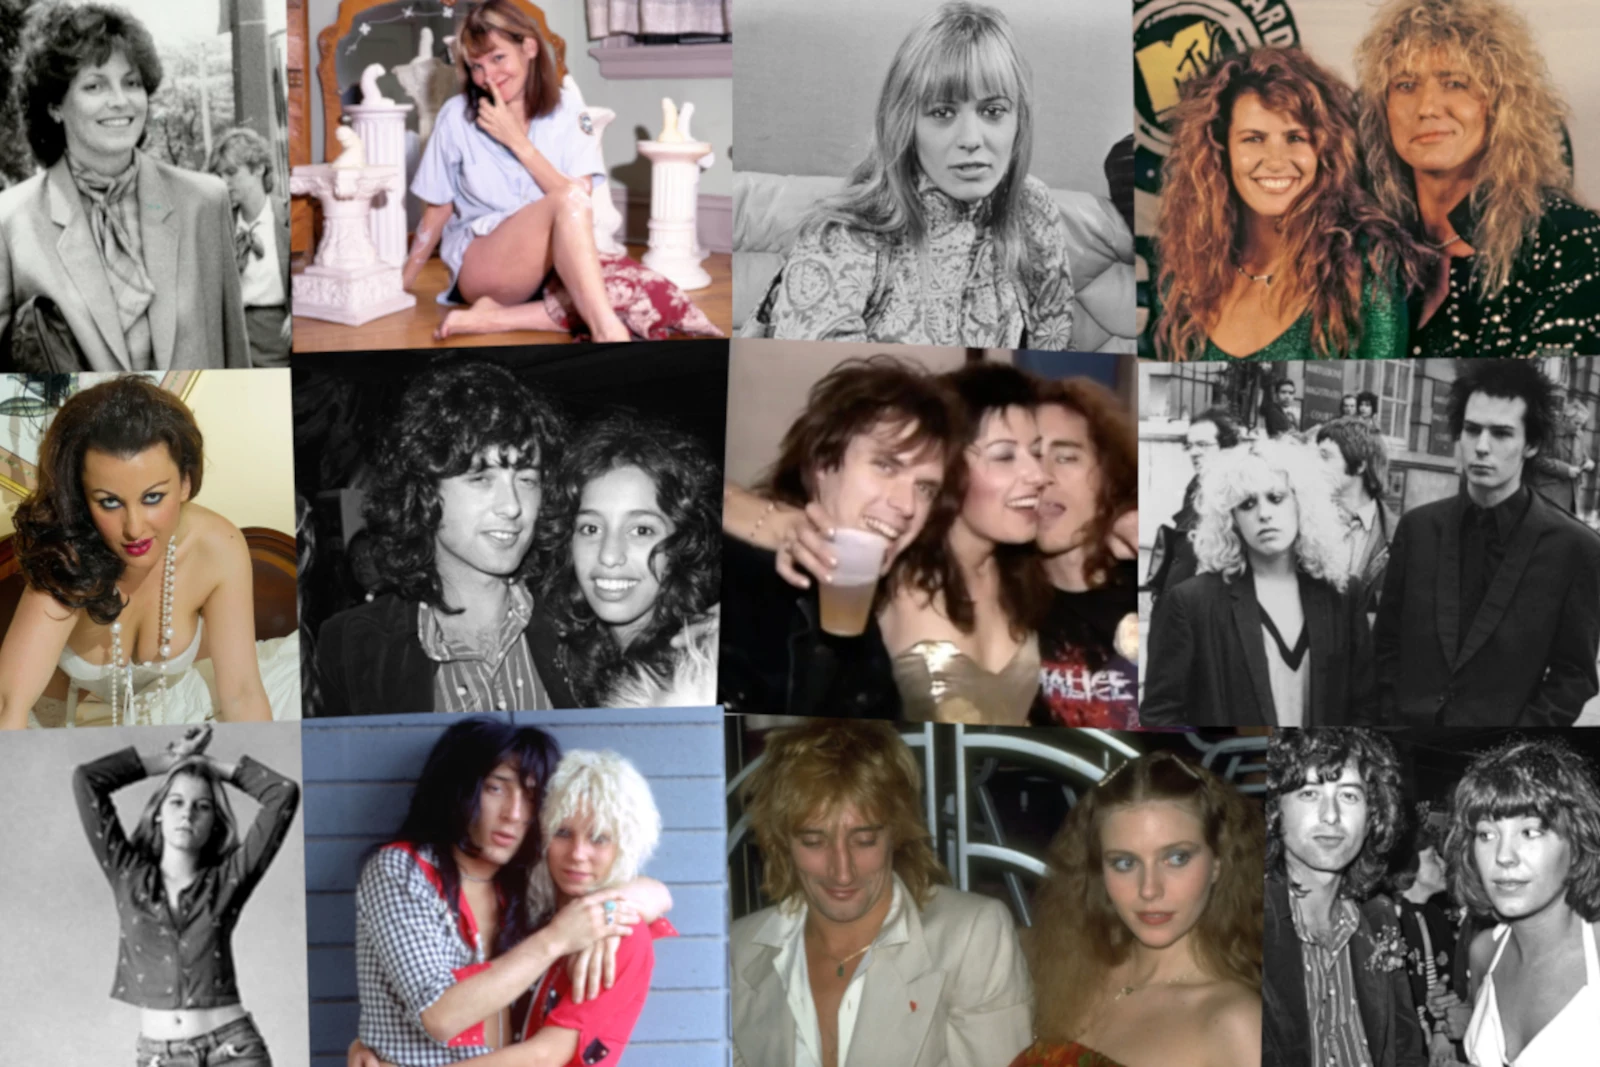 15 of Rock's Famous Groupies